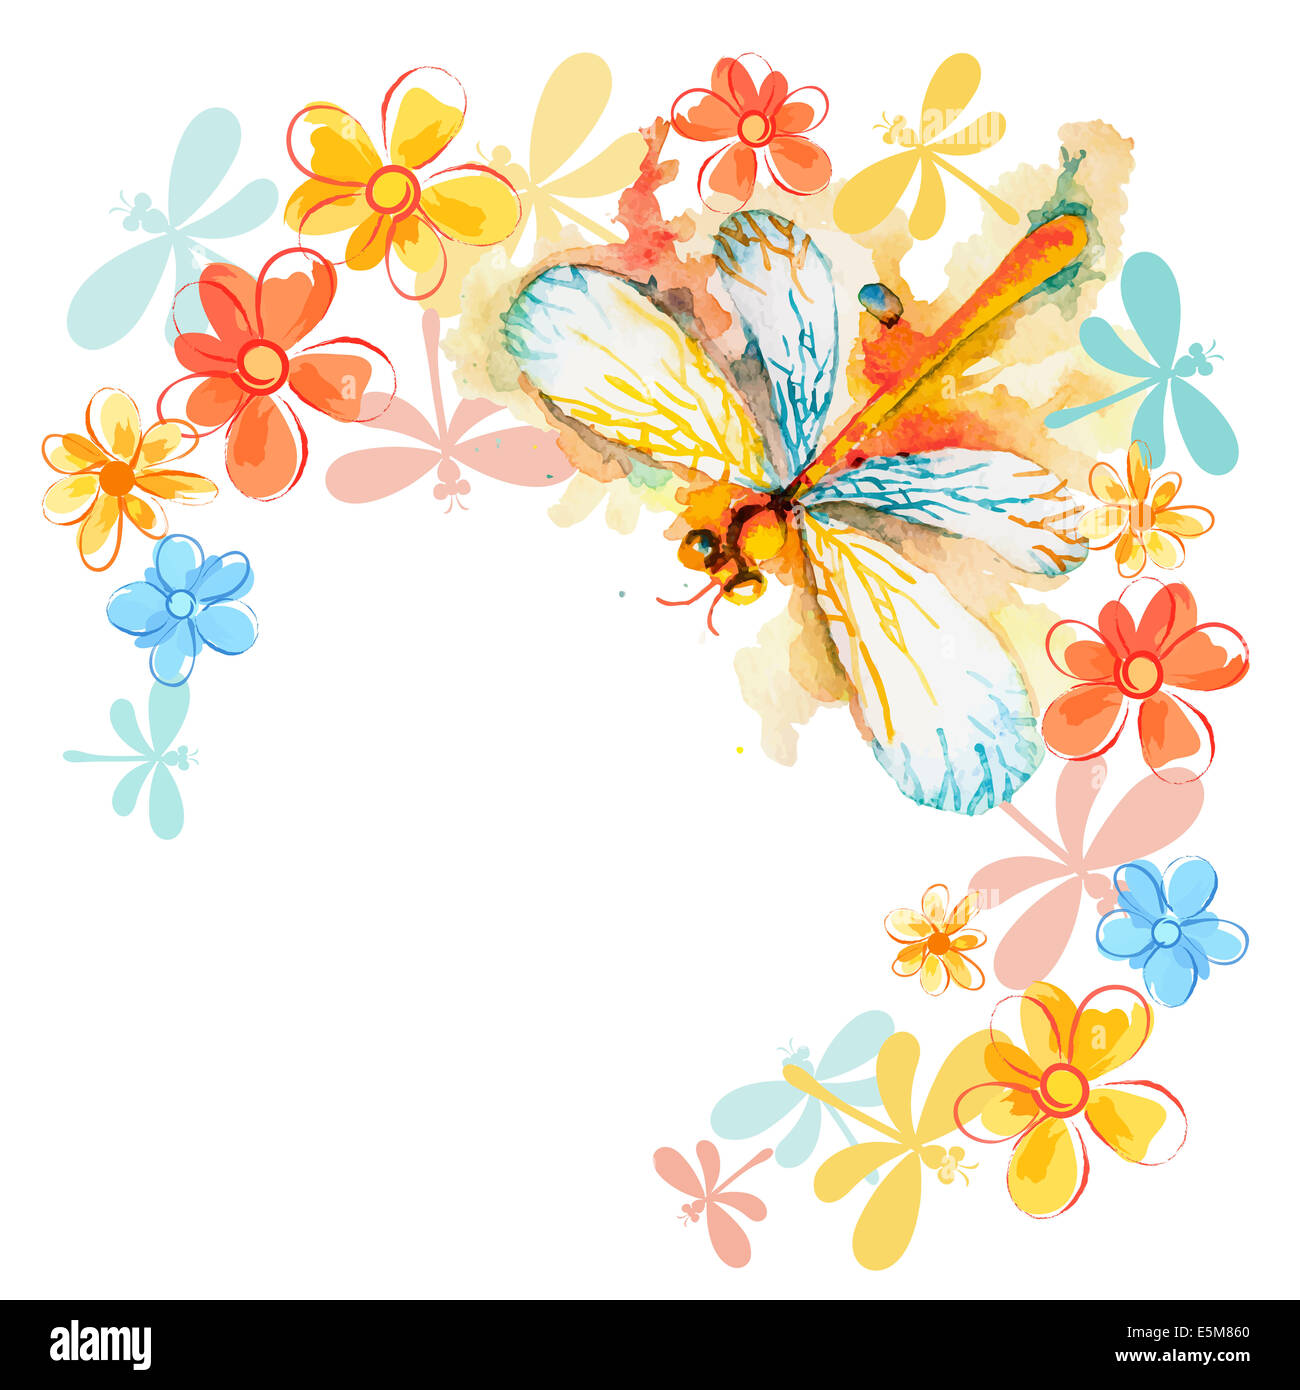 Greeting background with beautiful watercolor flying orange dragonfly and gentle flowers Stock Photo